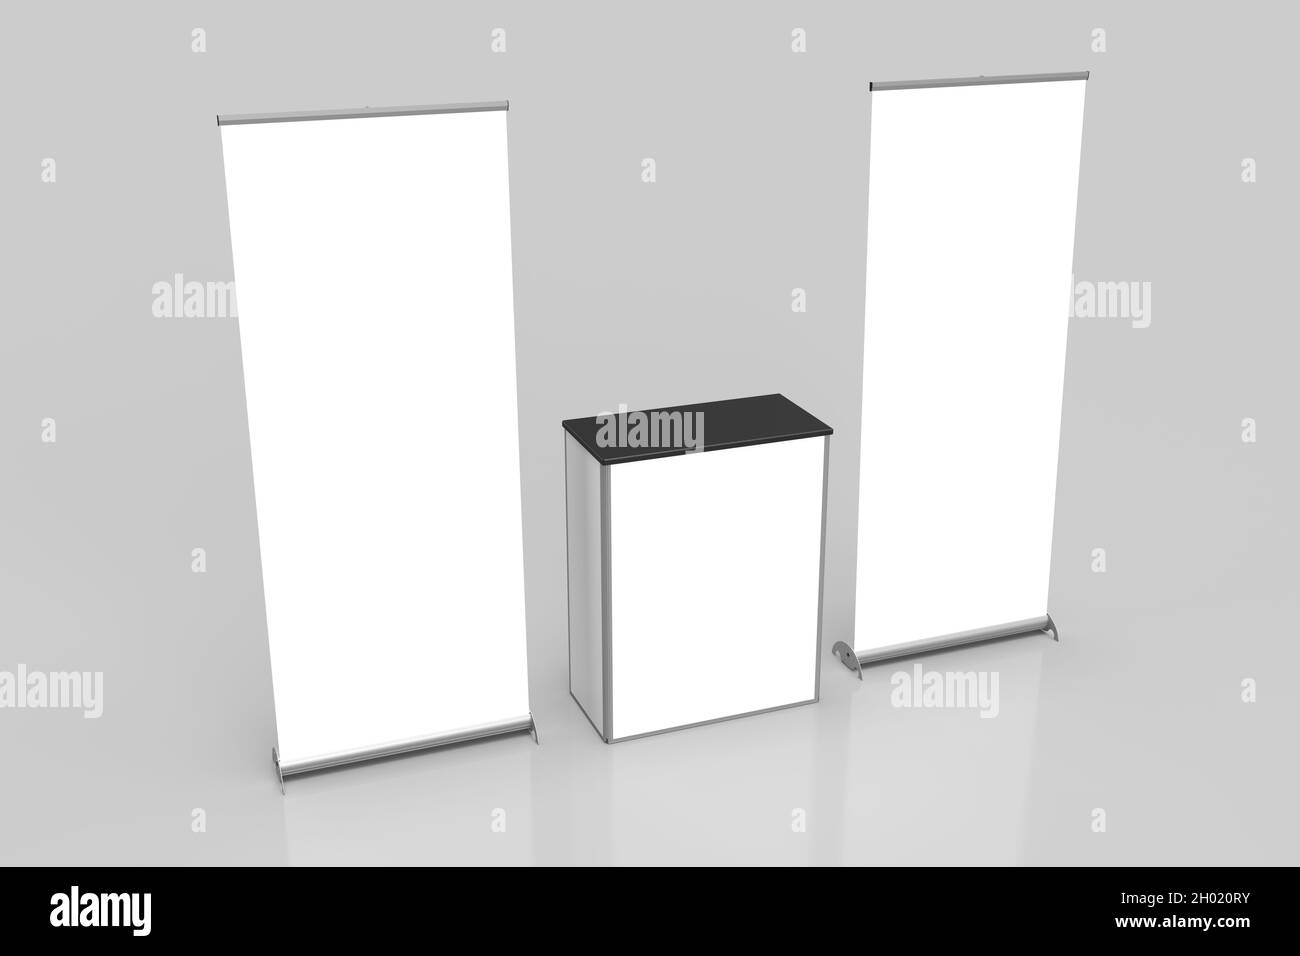 Two White Pullup Banner Exhibition Displays and Point of Sale Table in the middle Isolated on a grey background, Left Perspective View, for mockup and Stock Photo